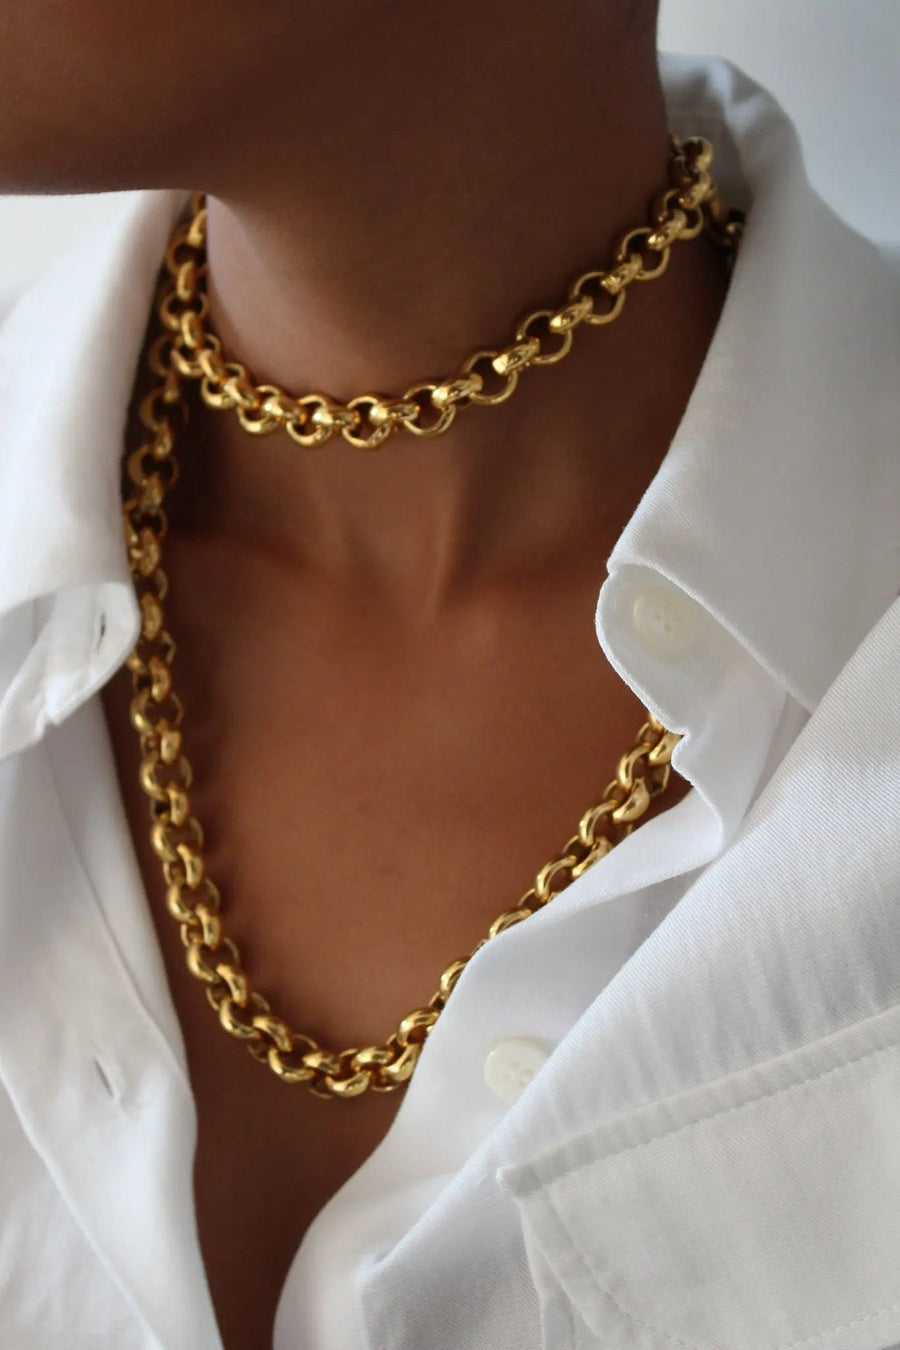 Chanel Necklace Vintage 1990s, Chunky Chain Necklace Jagged Metal 